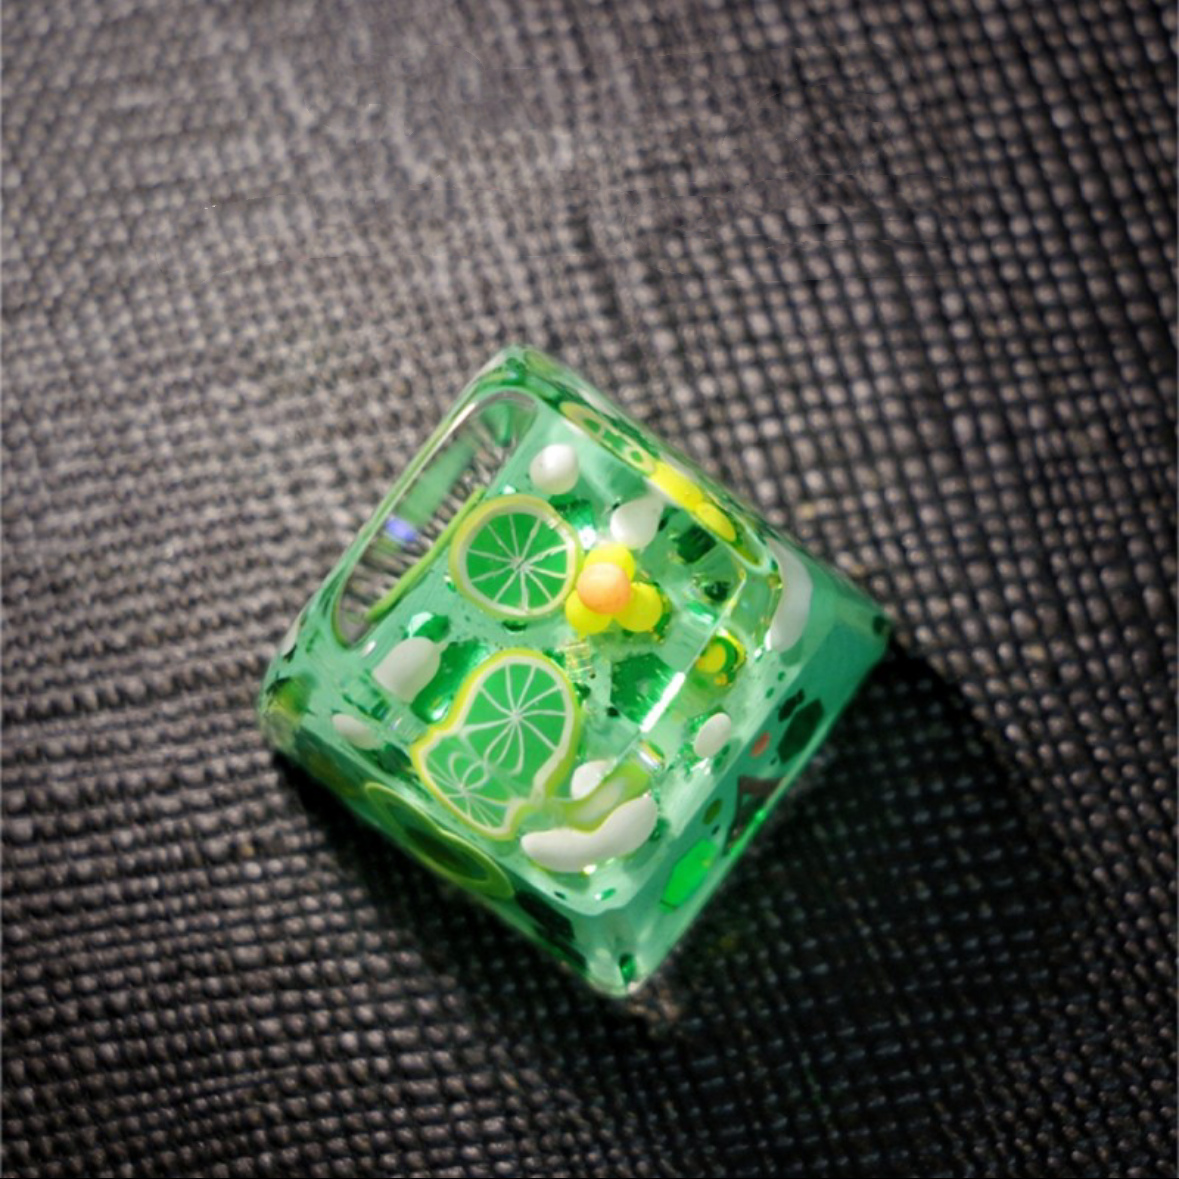 "Refresh your keyboard setup with our 'Lime Soda' Custom Artisan Keycaps. These handcrafted keycaps are inspired by the zesty goodness of lime soda, bringing a burst of citrusy charm to your typing experience. Crafted with precision, they feature a playful lime soda design that's both stylish and unique. Quench your thirst for creativity with these delightful artisan keycaps." 🍋🥤💻 #KeyboardAccessories #ArtisanKeycaps #LimeSodaVibes